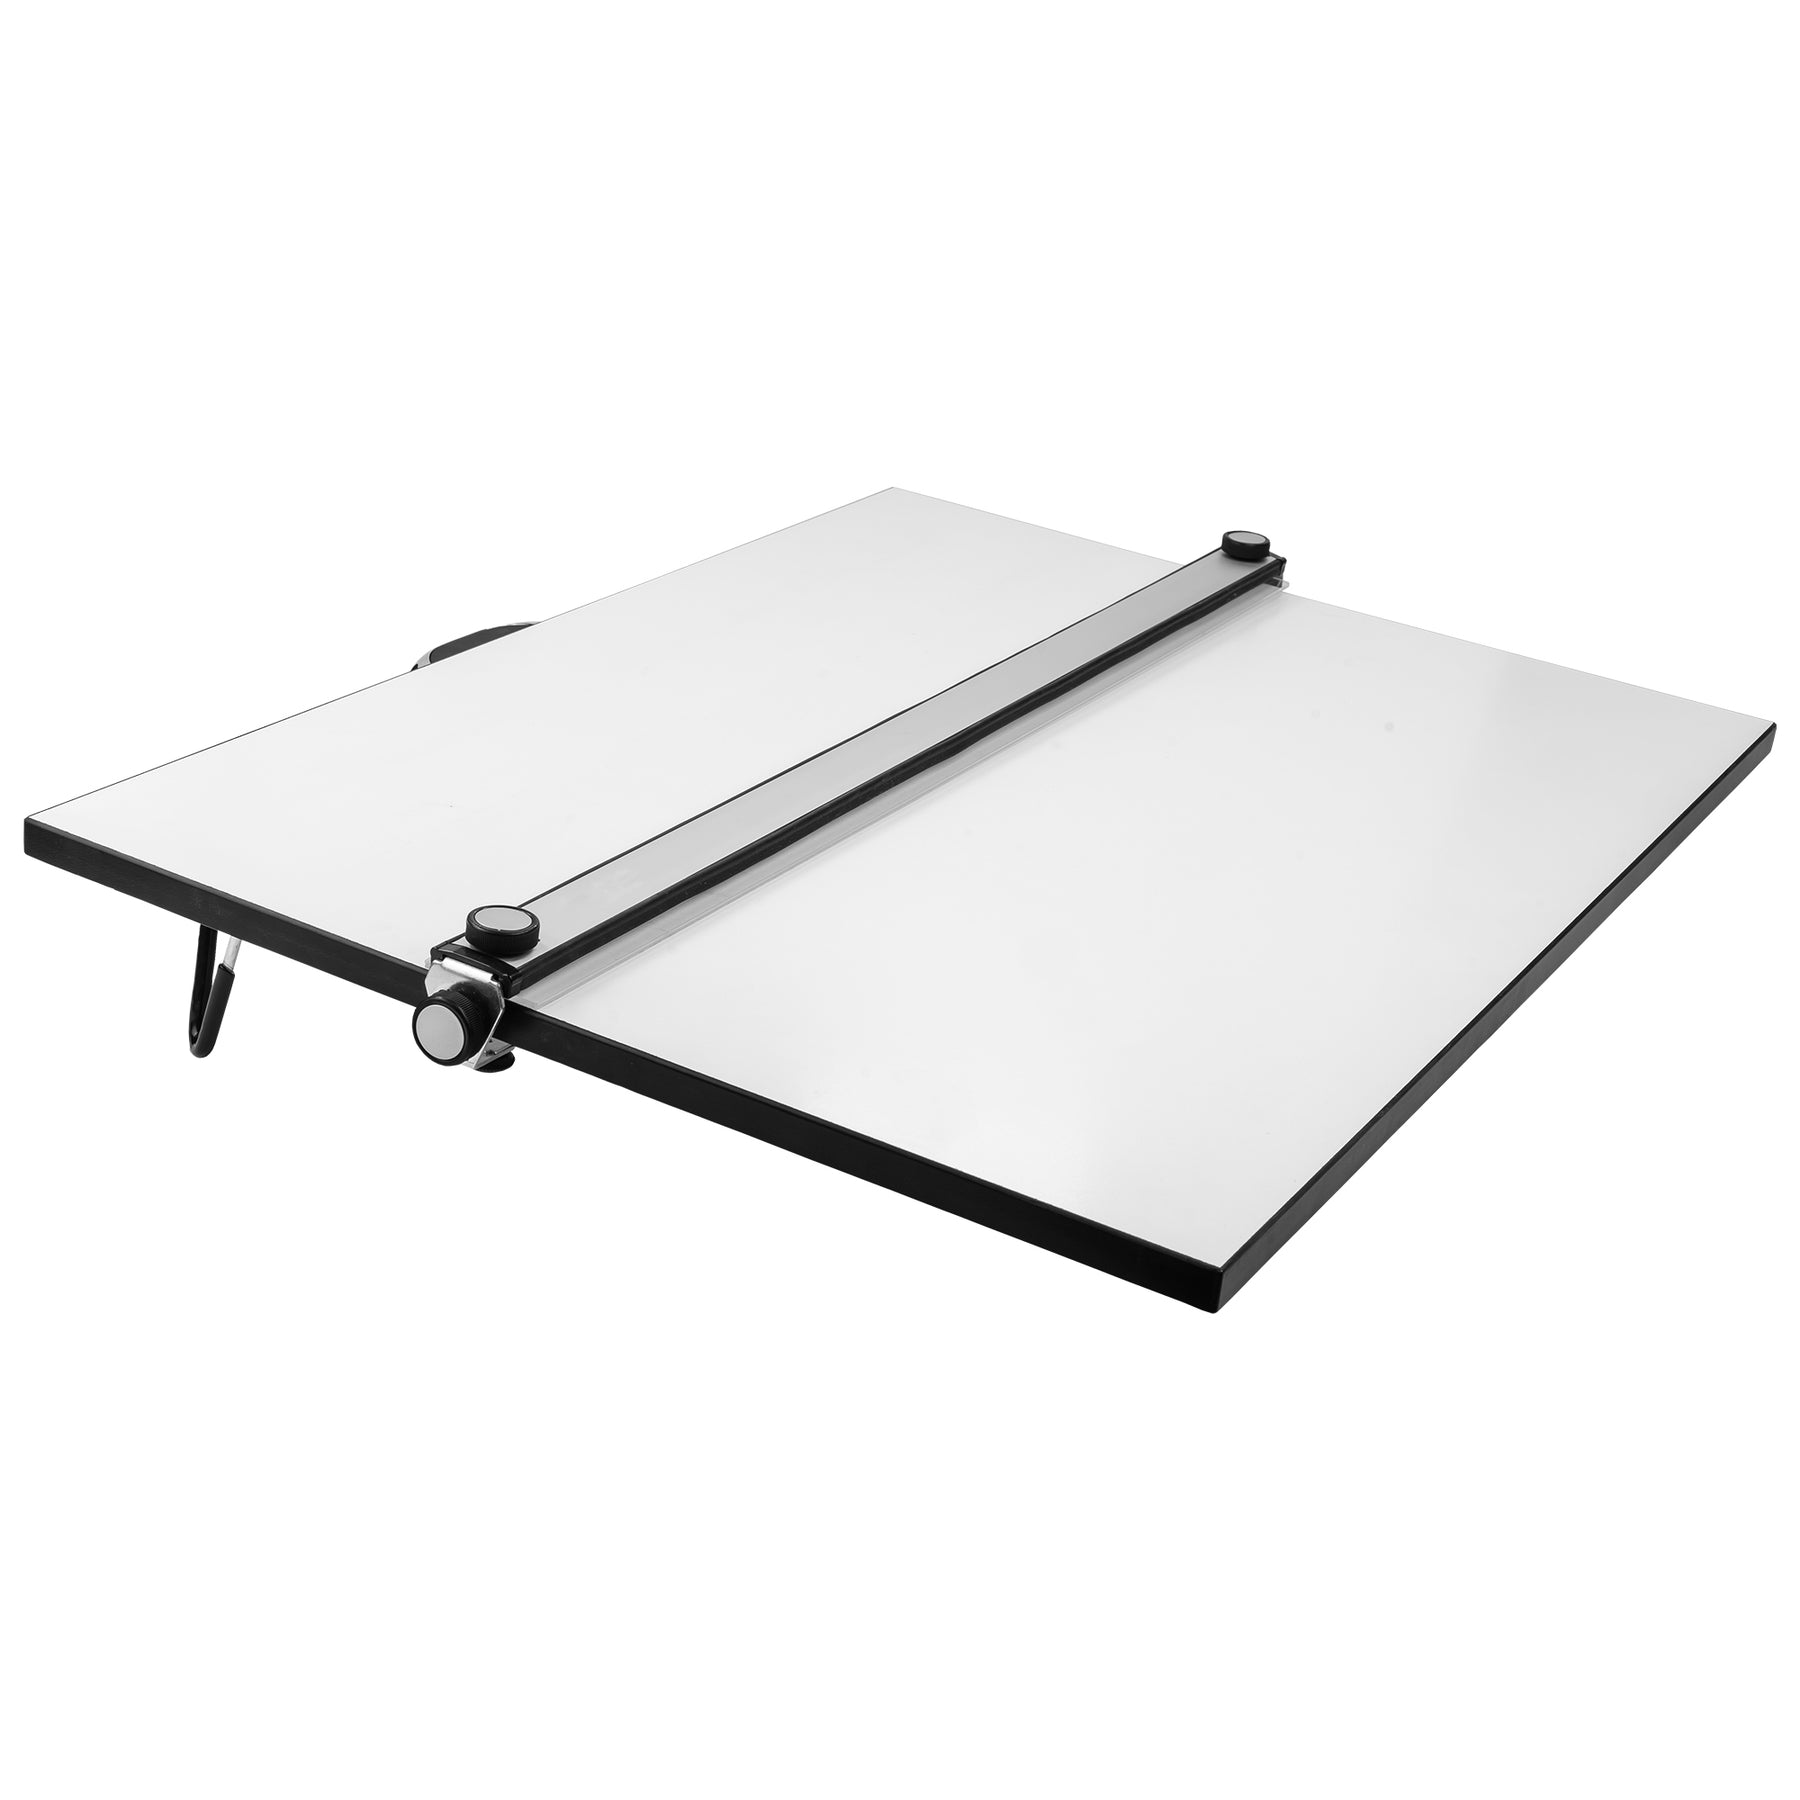 Pacific Arc, Table Top Drawing Board with Parallel Bar, White, 16 inch